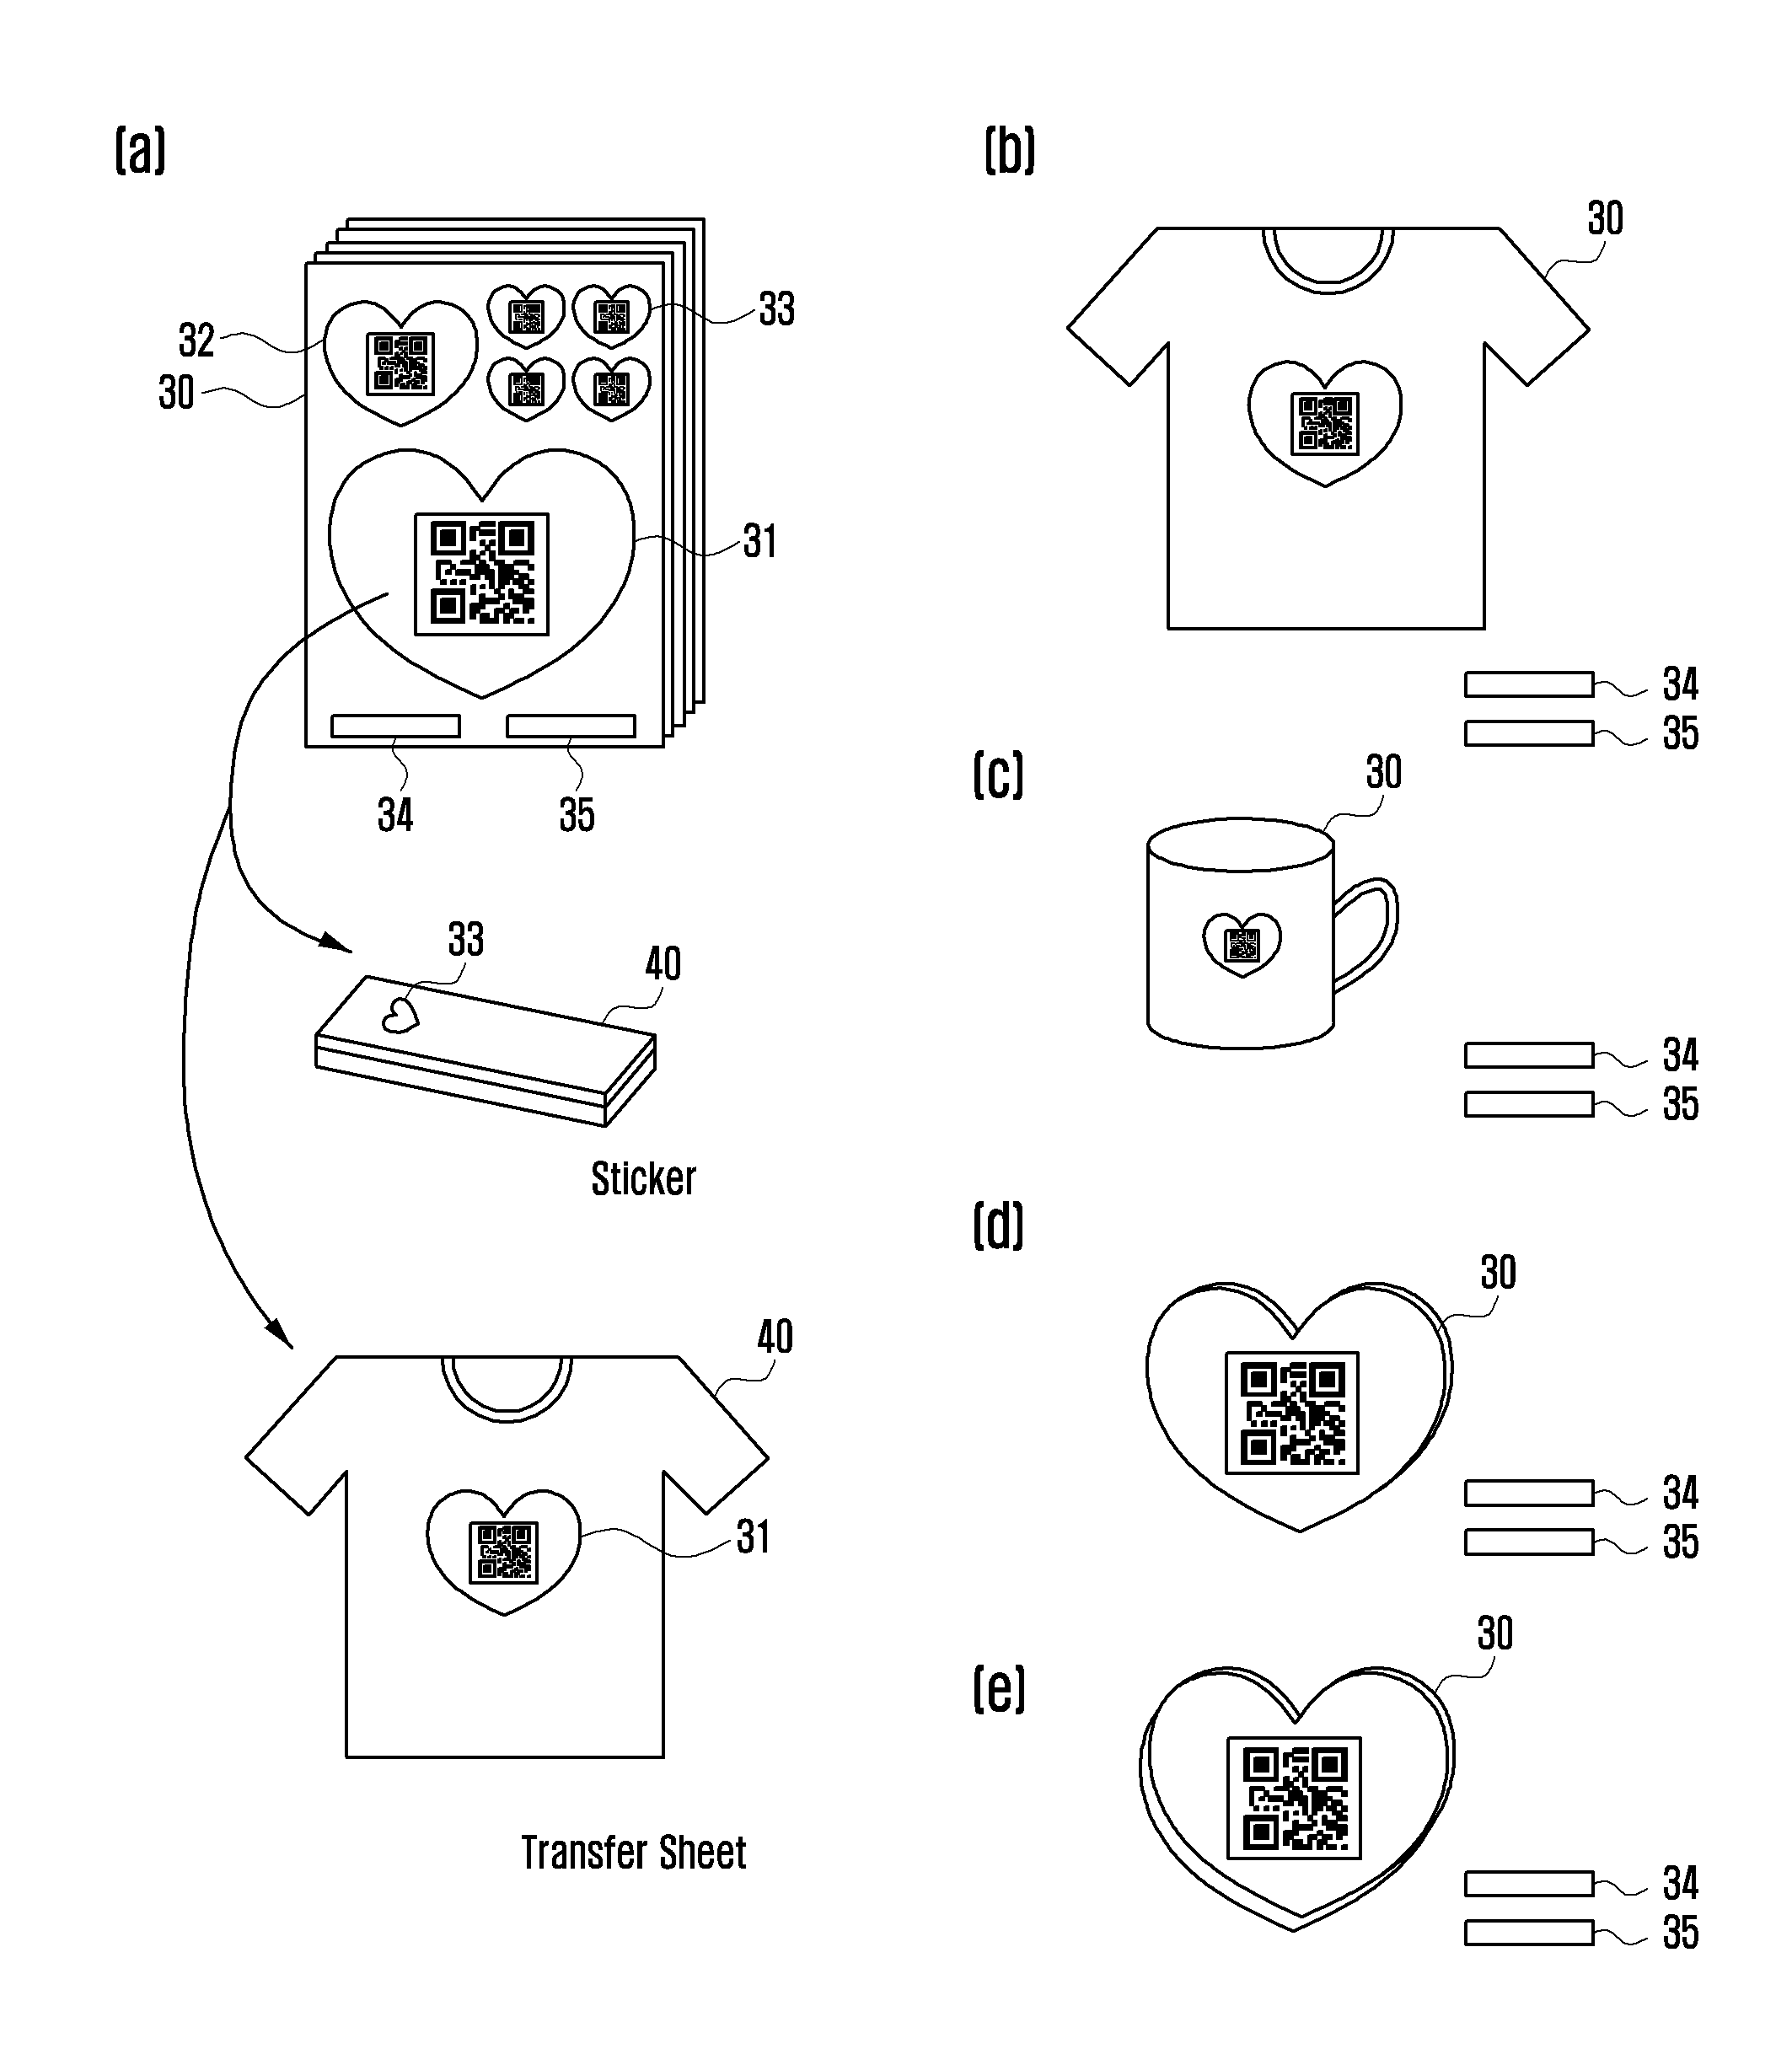 Qr code display object, method of selling qr codes using same and method of providing information thereof